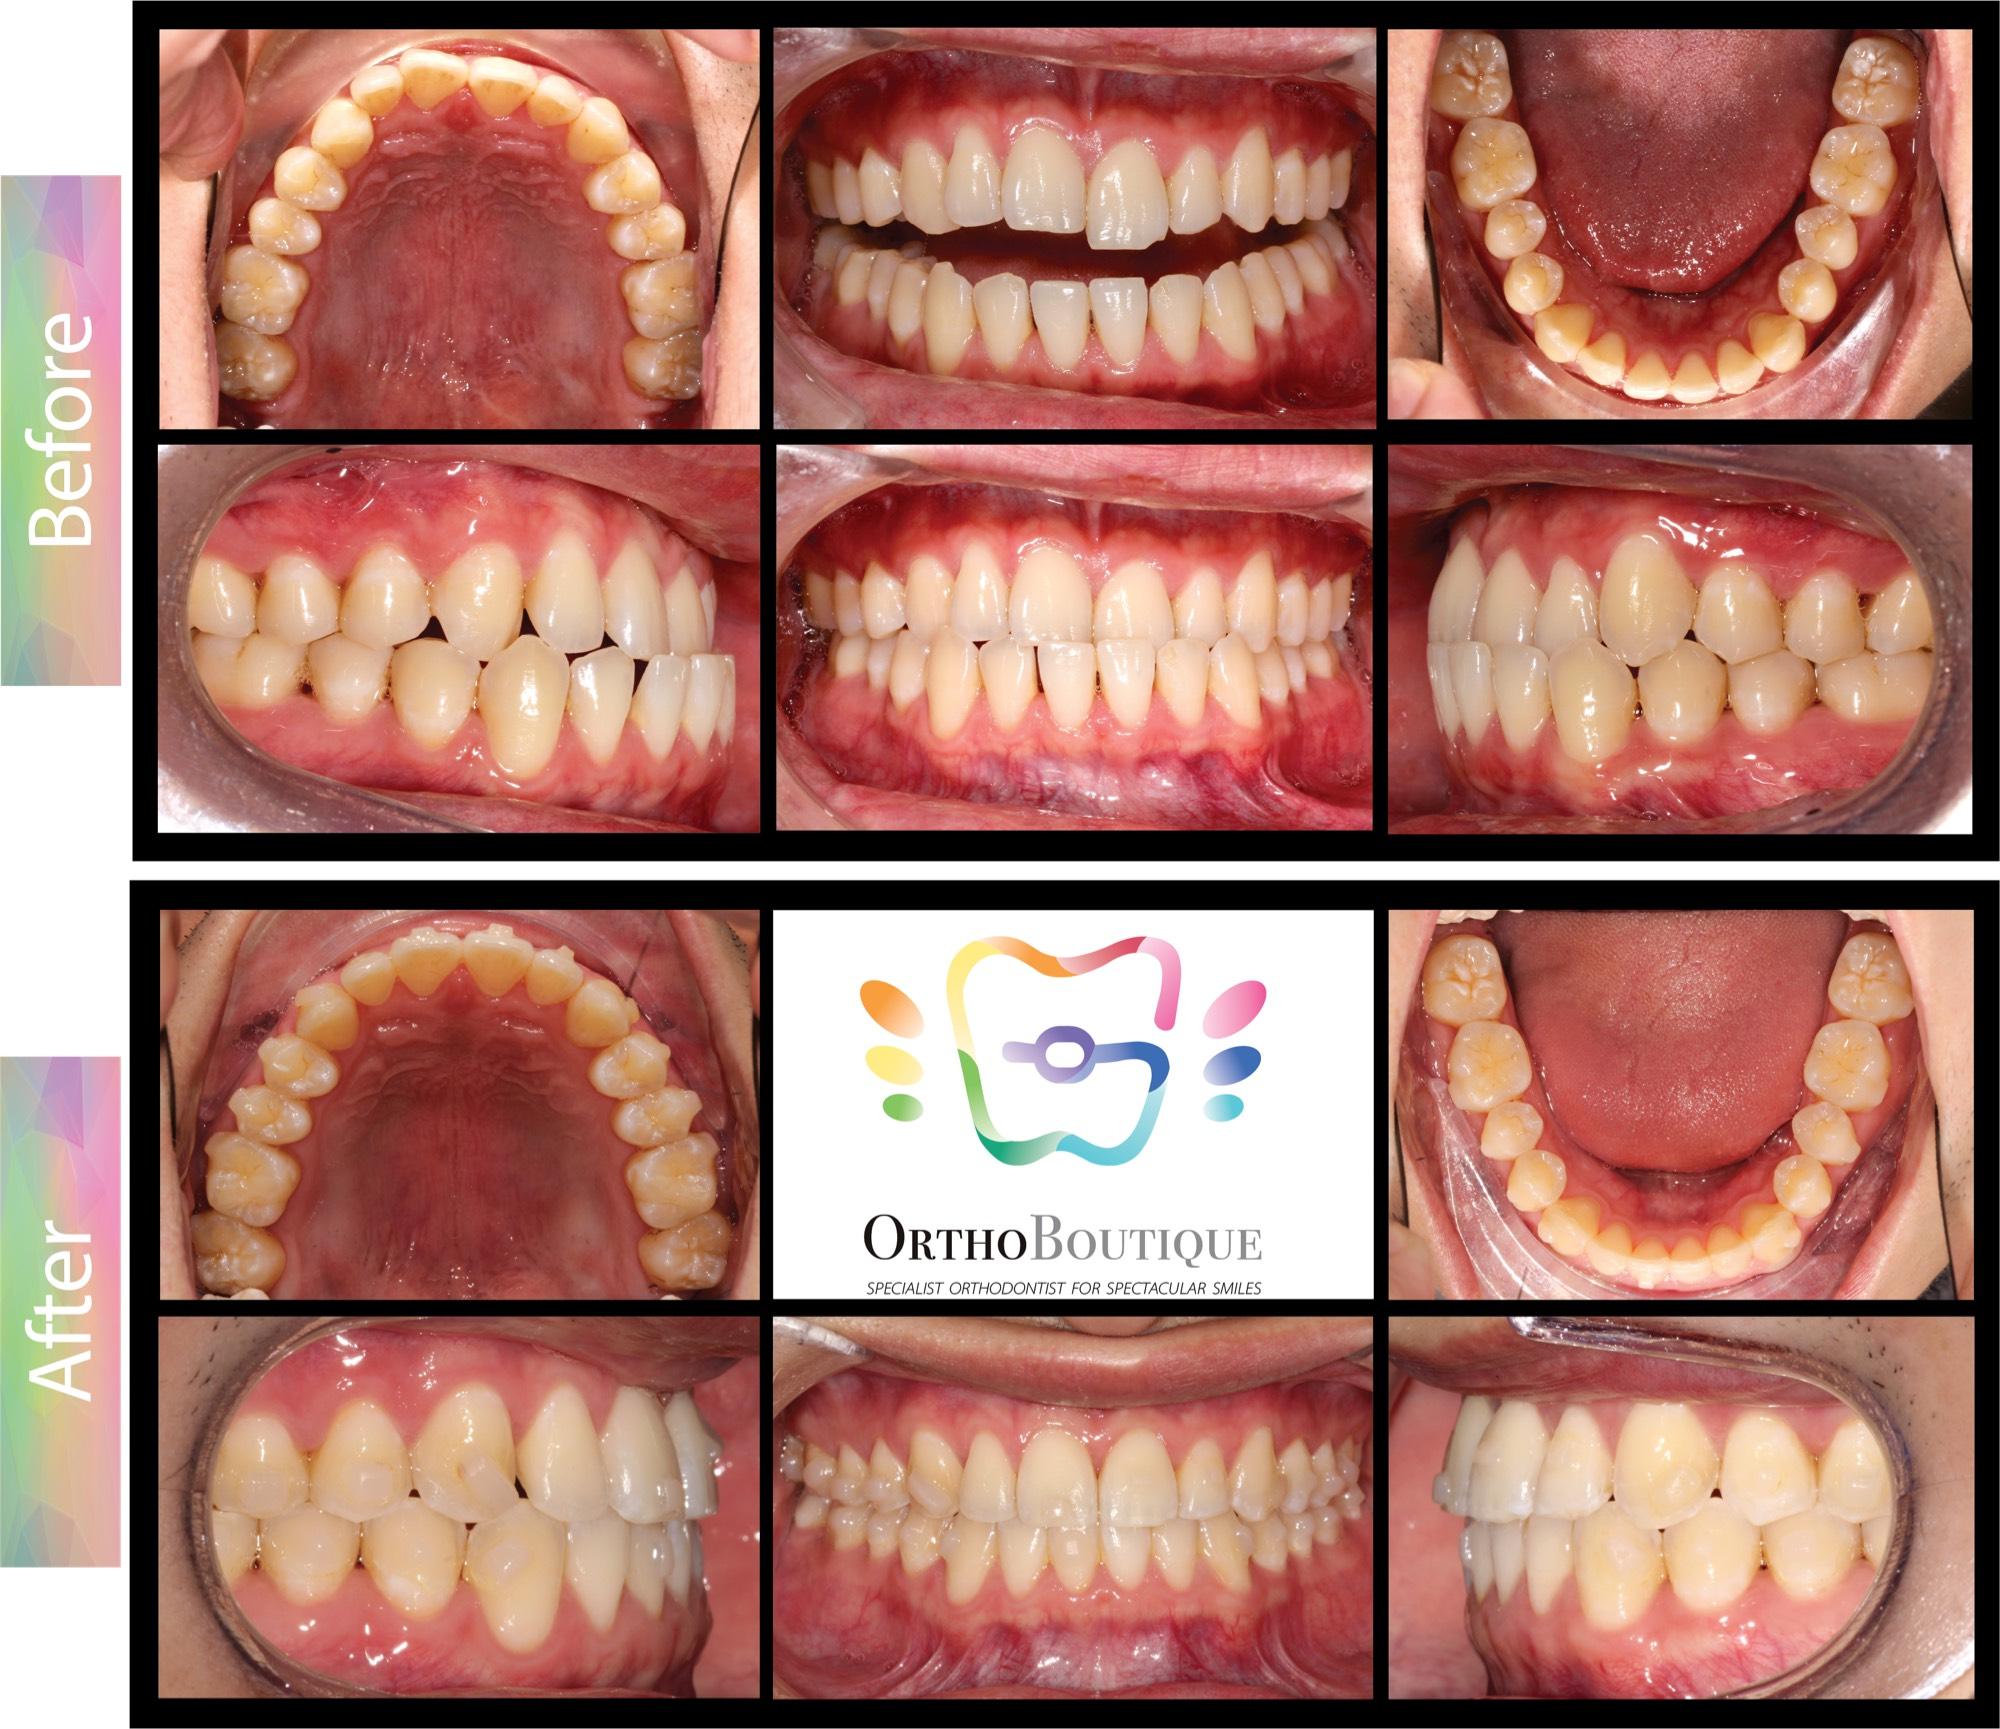 OrthoBoutique - CASE #16 Class III bite relationship, underbite, lower spacing Before and after